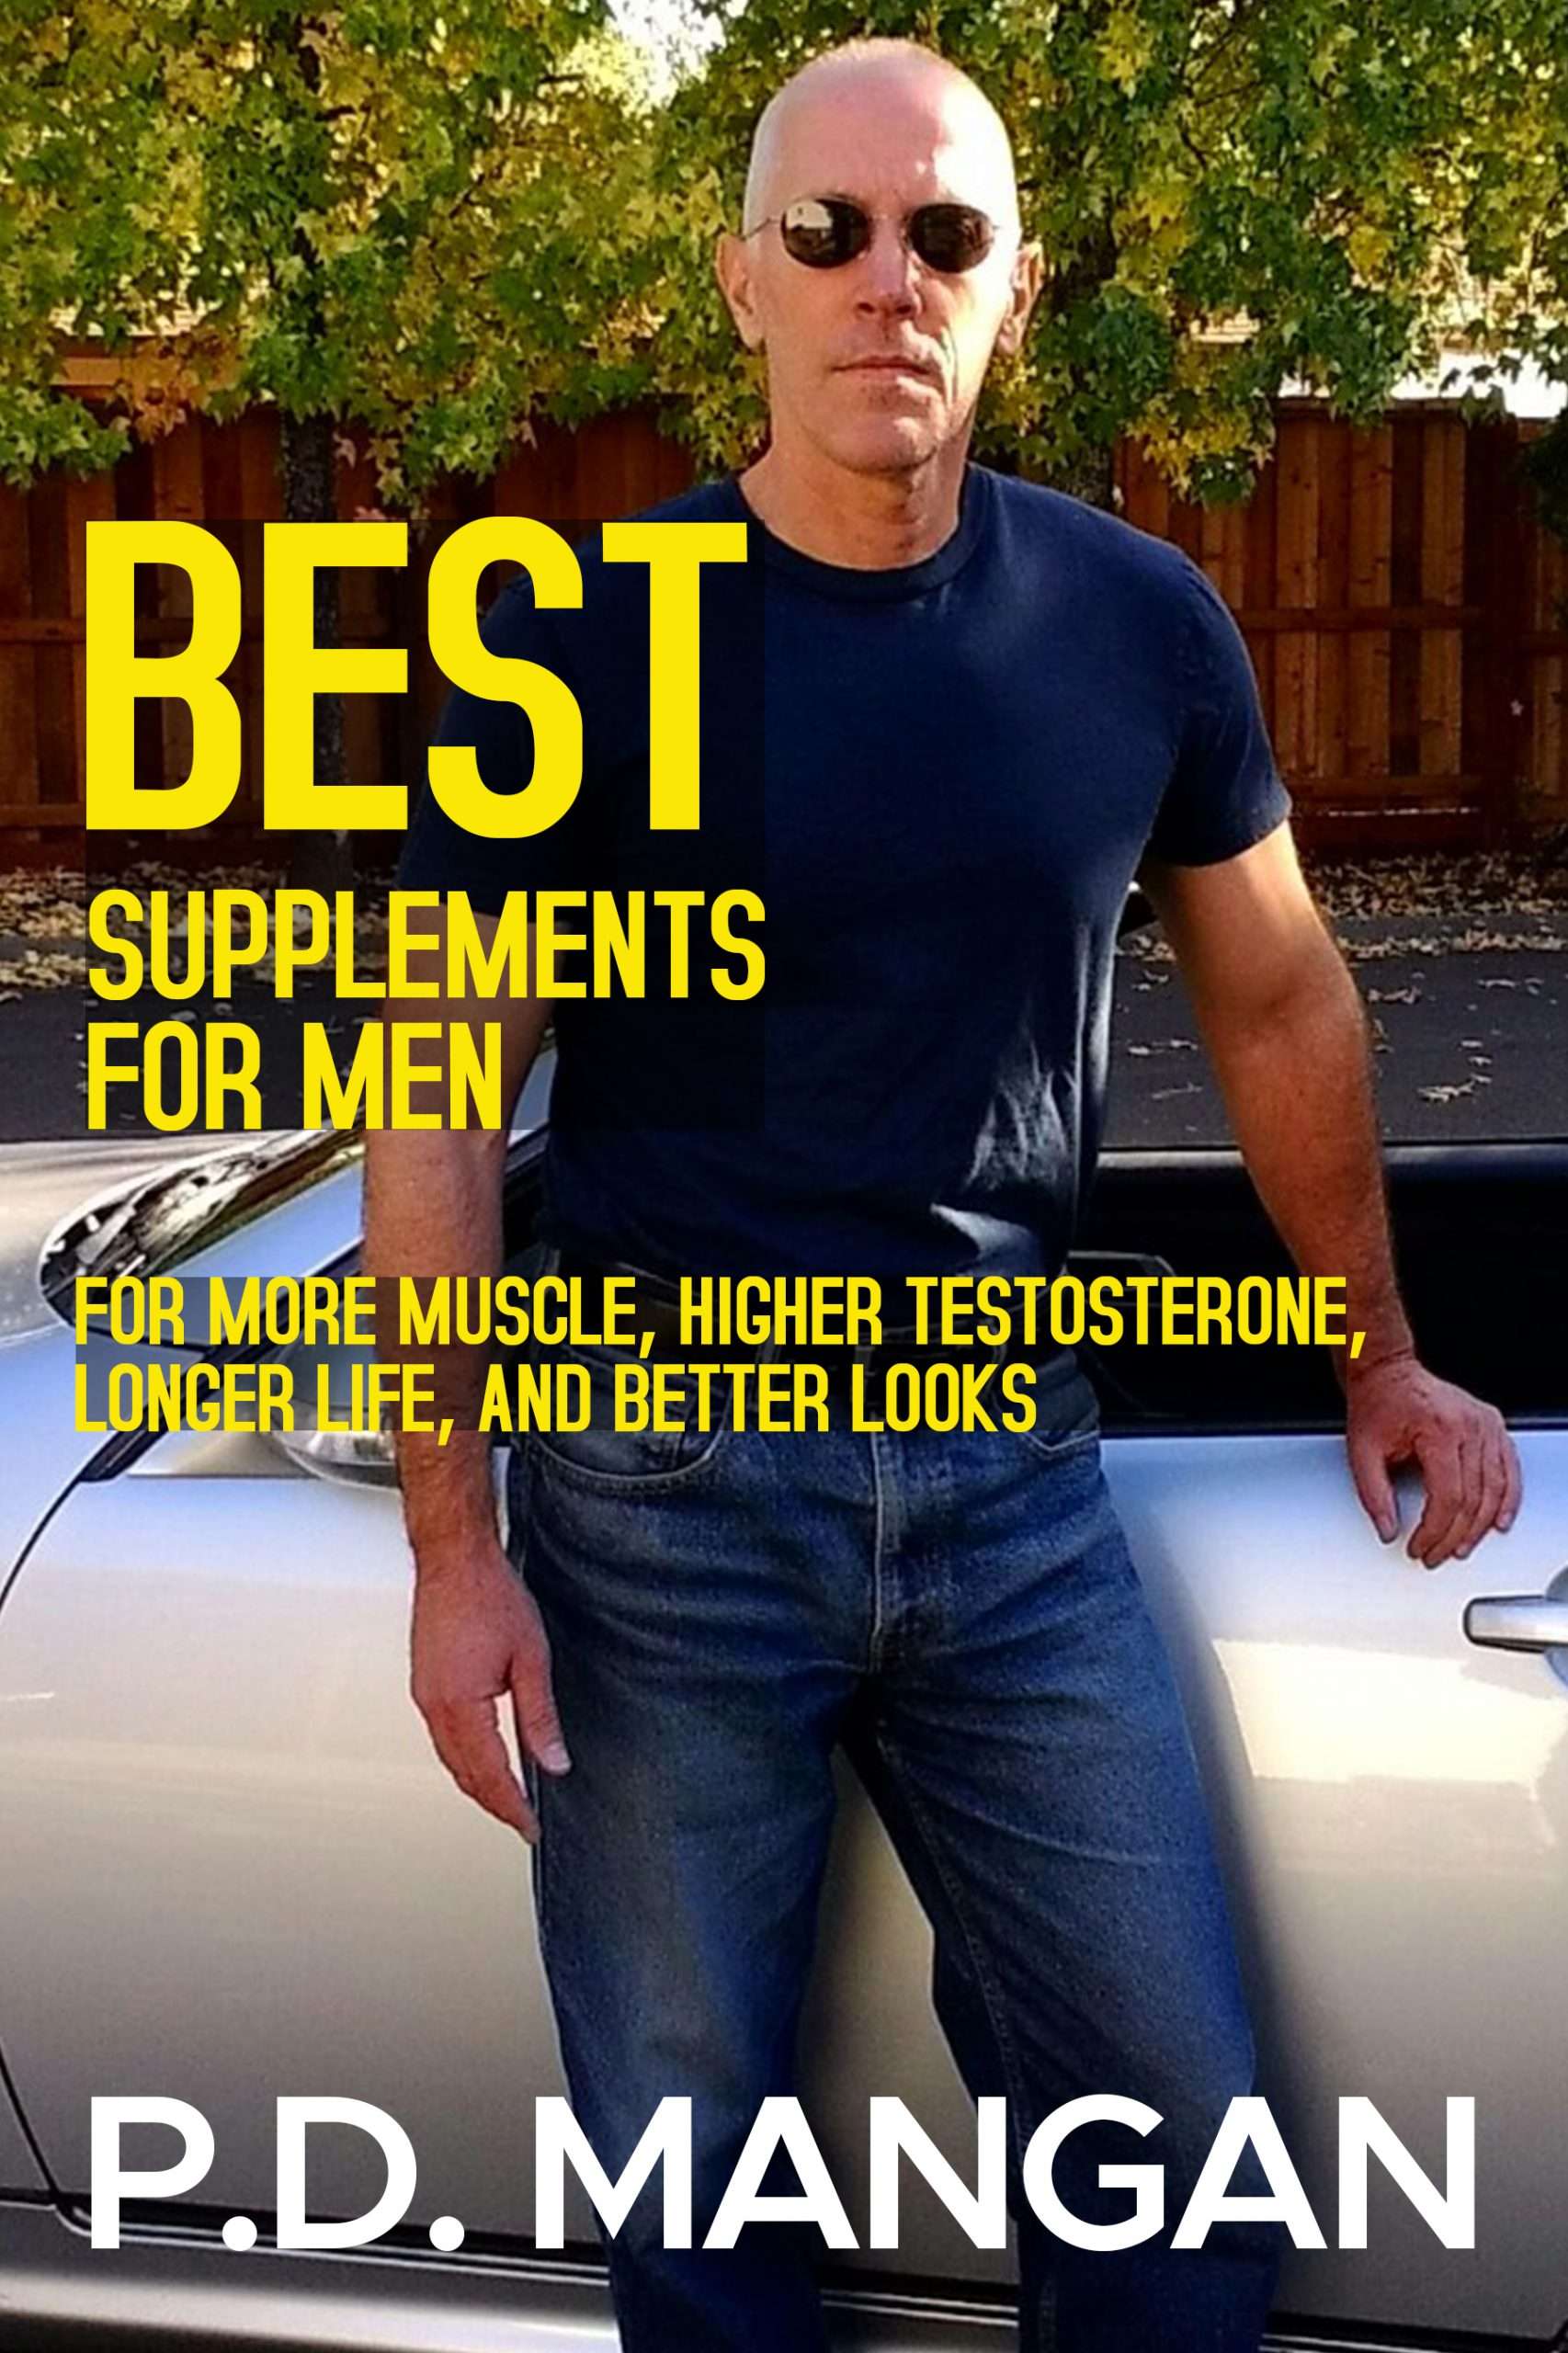 Best Supplements for Men: My New Book, Coming Soon